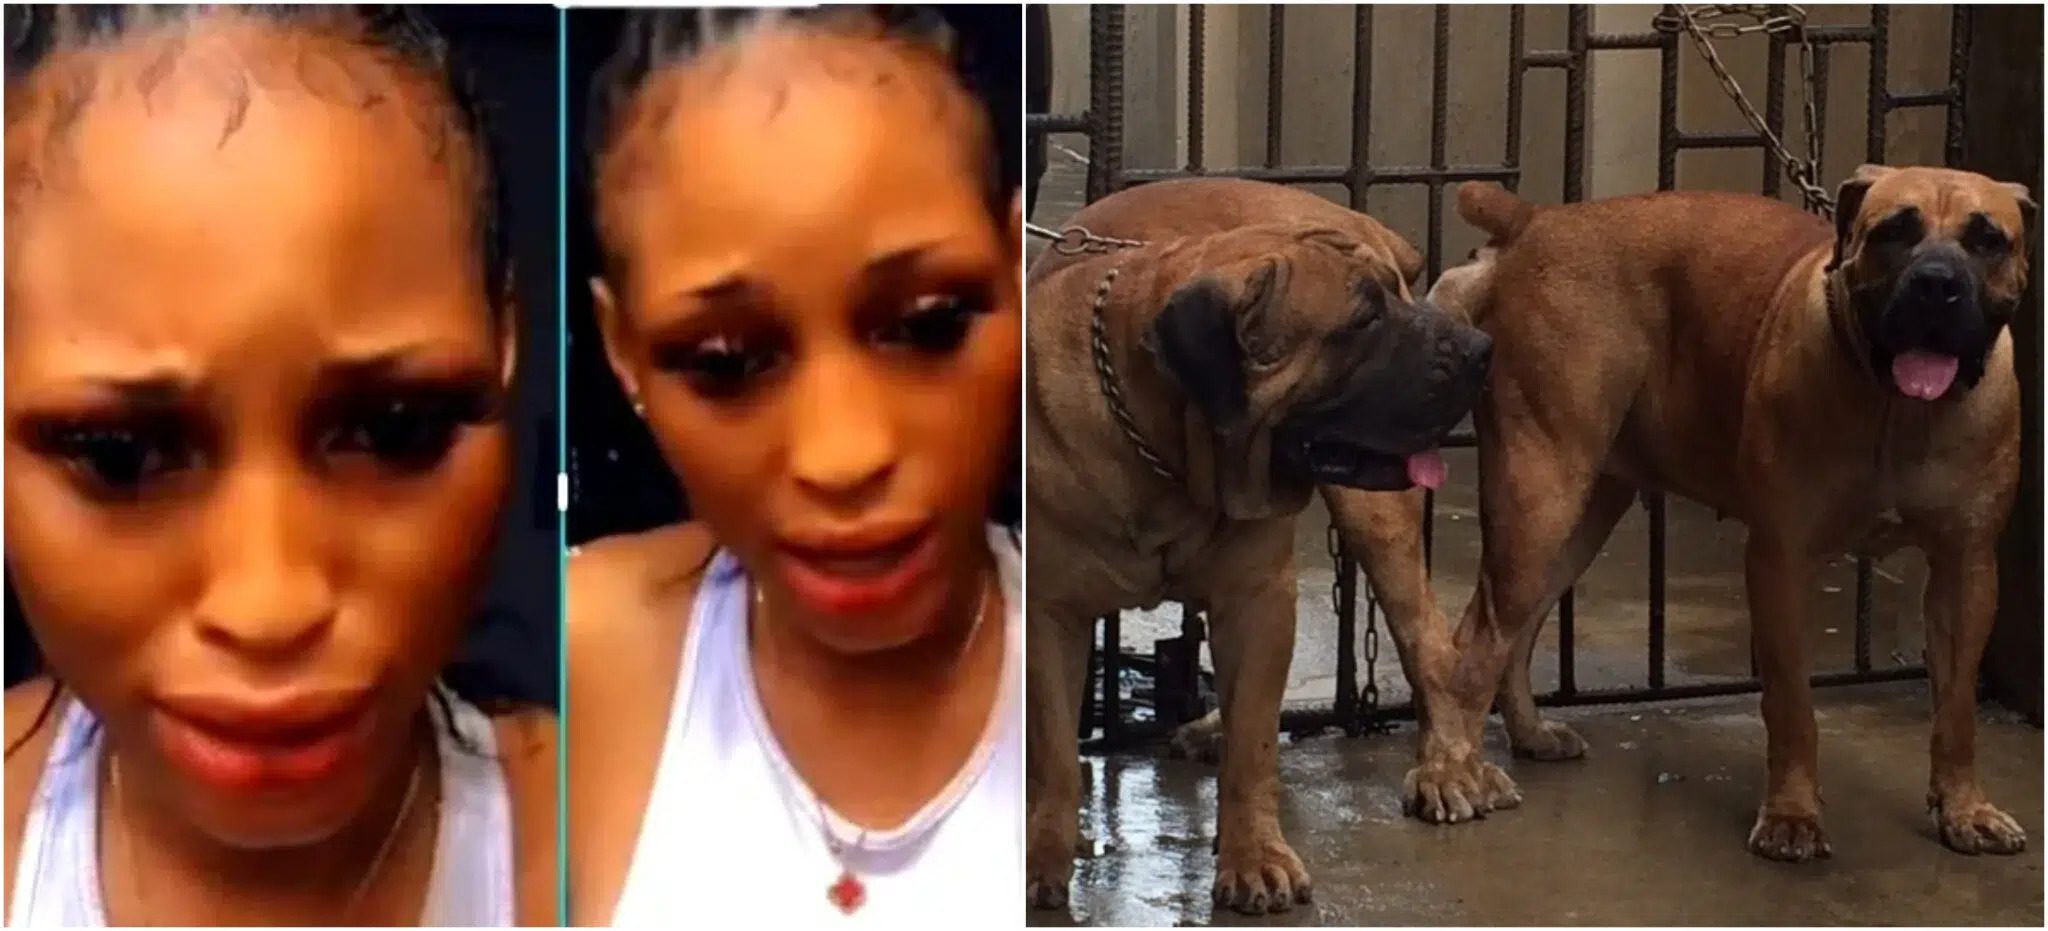 Dog Far Sex Com Hd Full Videos - Sad As Girl Captured In Viral Dog-Sex Video Dies Leaving Lessons For Others  To Learn -By Sandra Ijeoma Okoye â€“ Opinion Nigeria